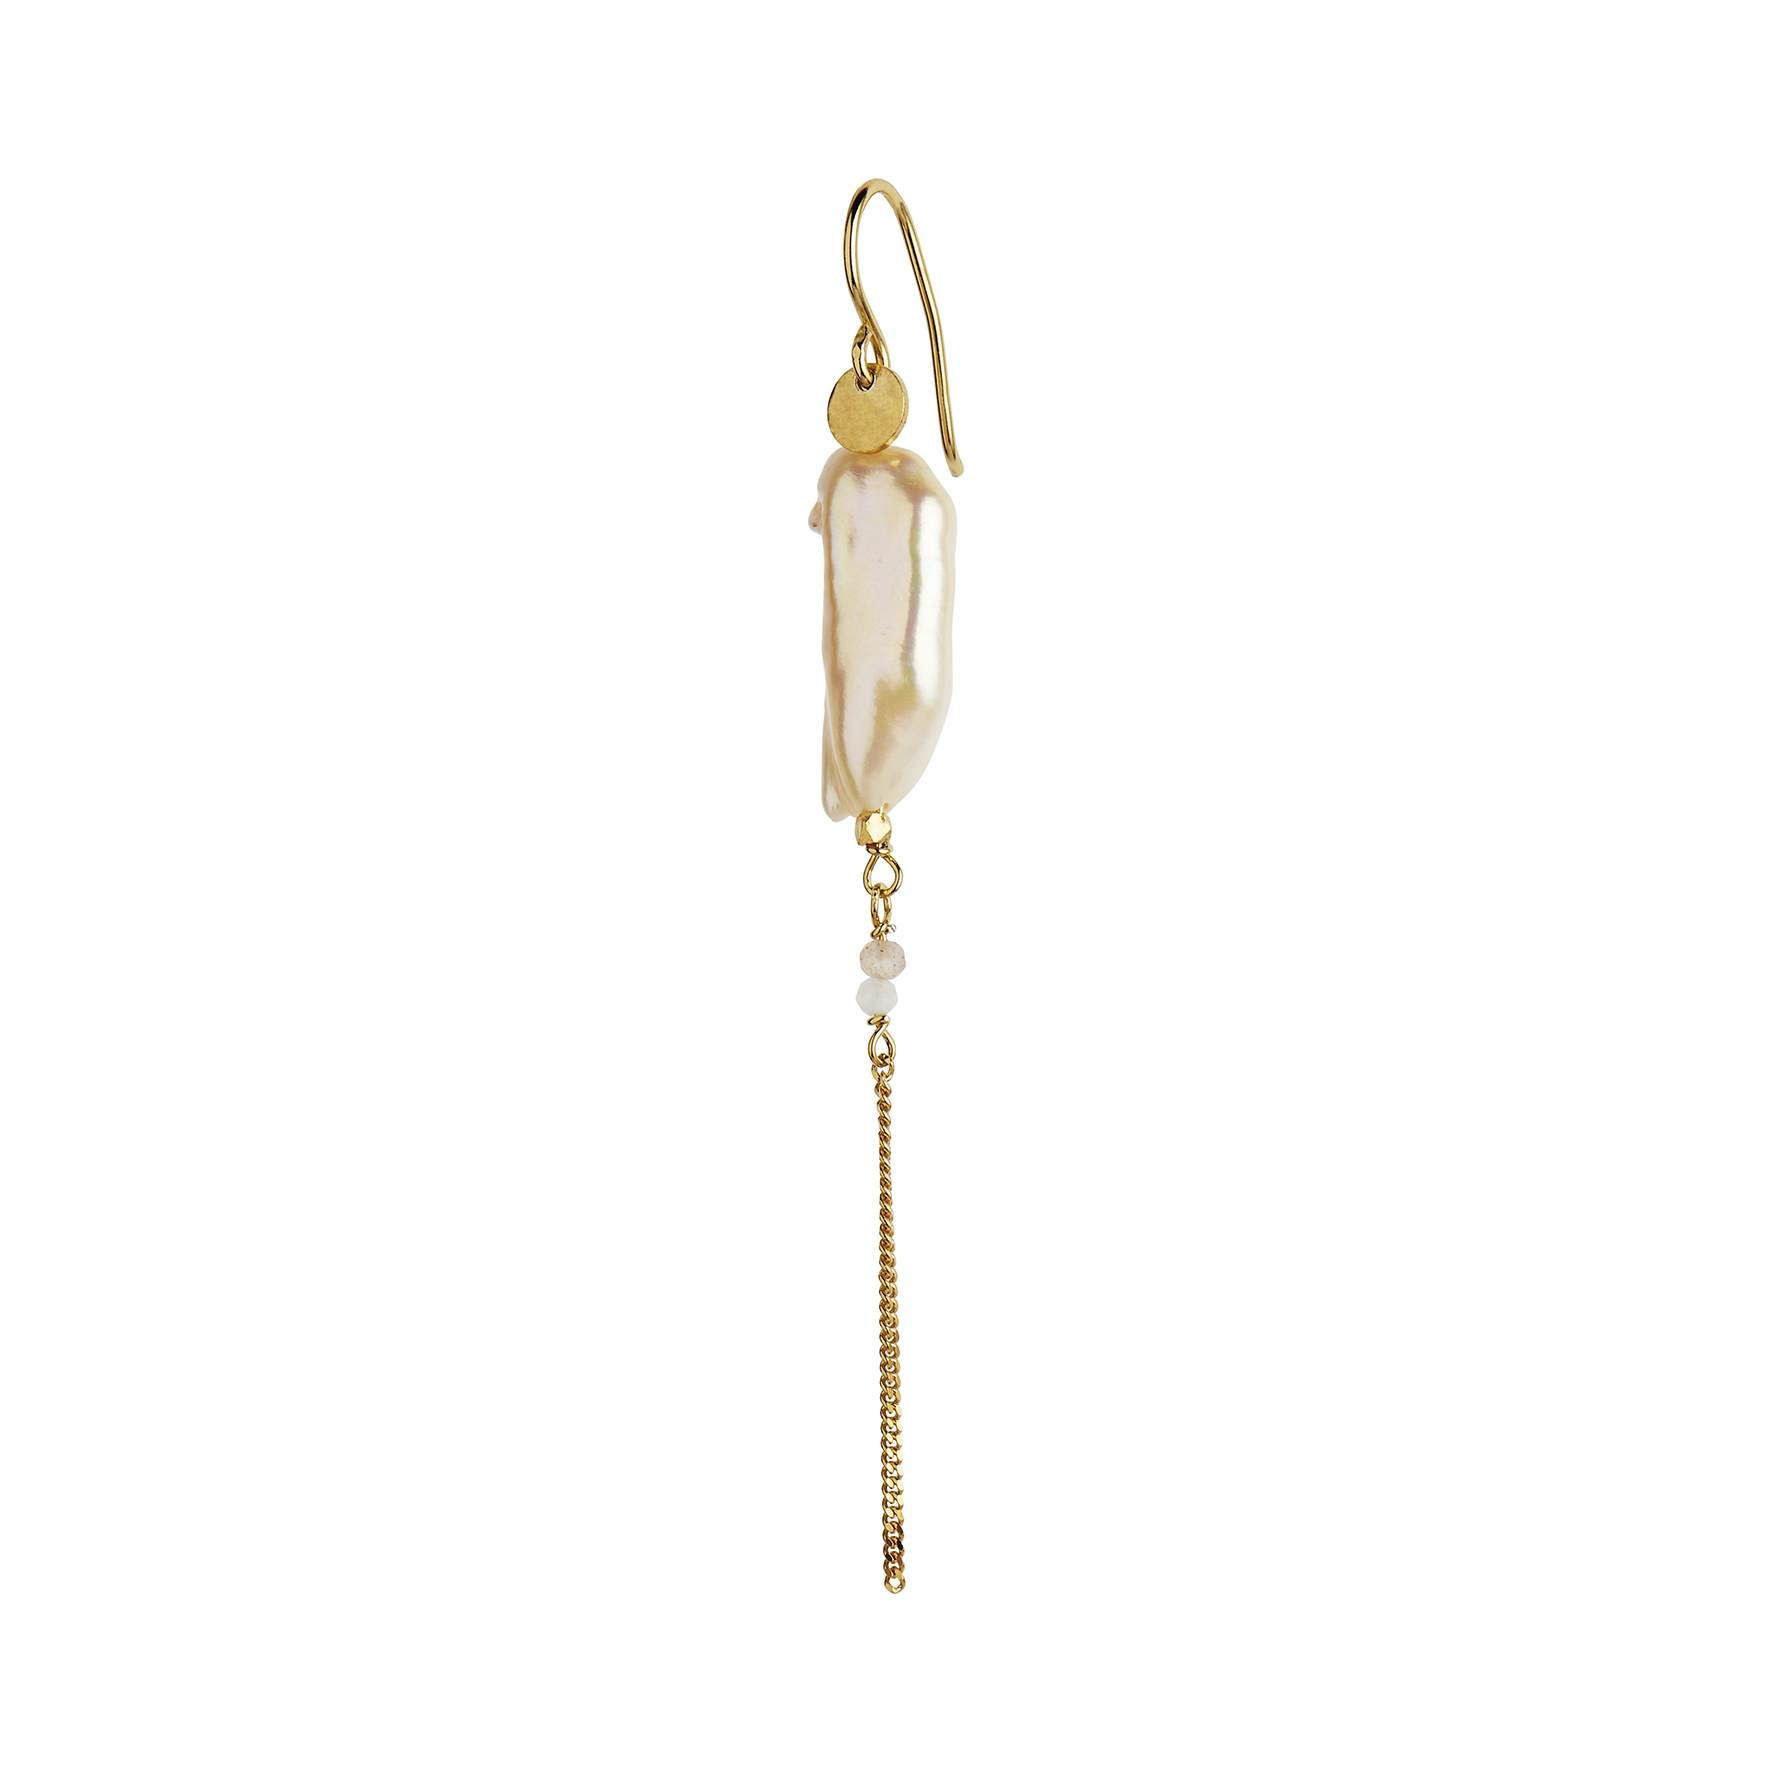 Long Baroque Pearl with Chain Earring Peach Sorbet fra STINE A Jewelry i Forgylt-Sølv Sterling 925|Freshwater Pearl